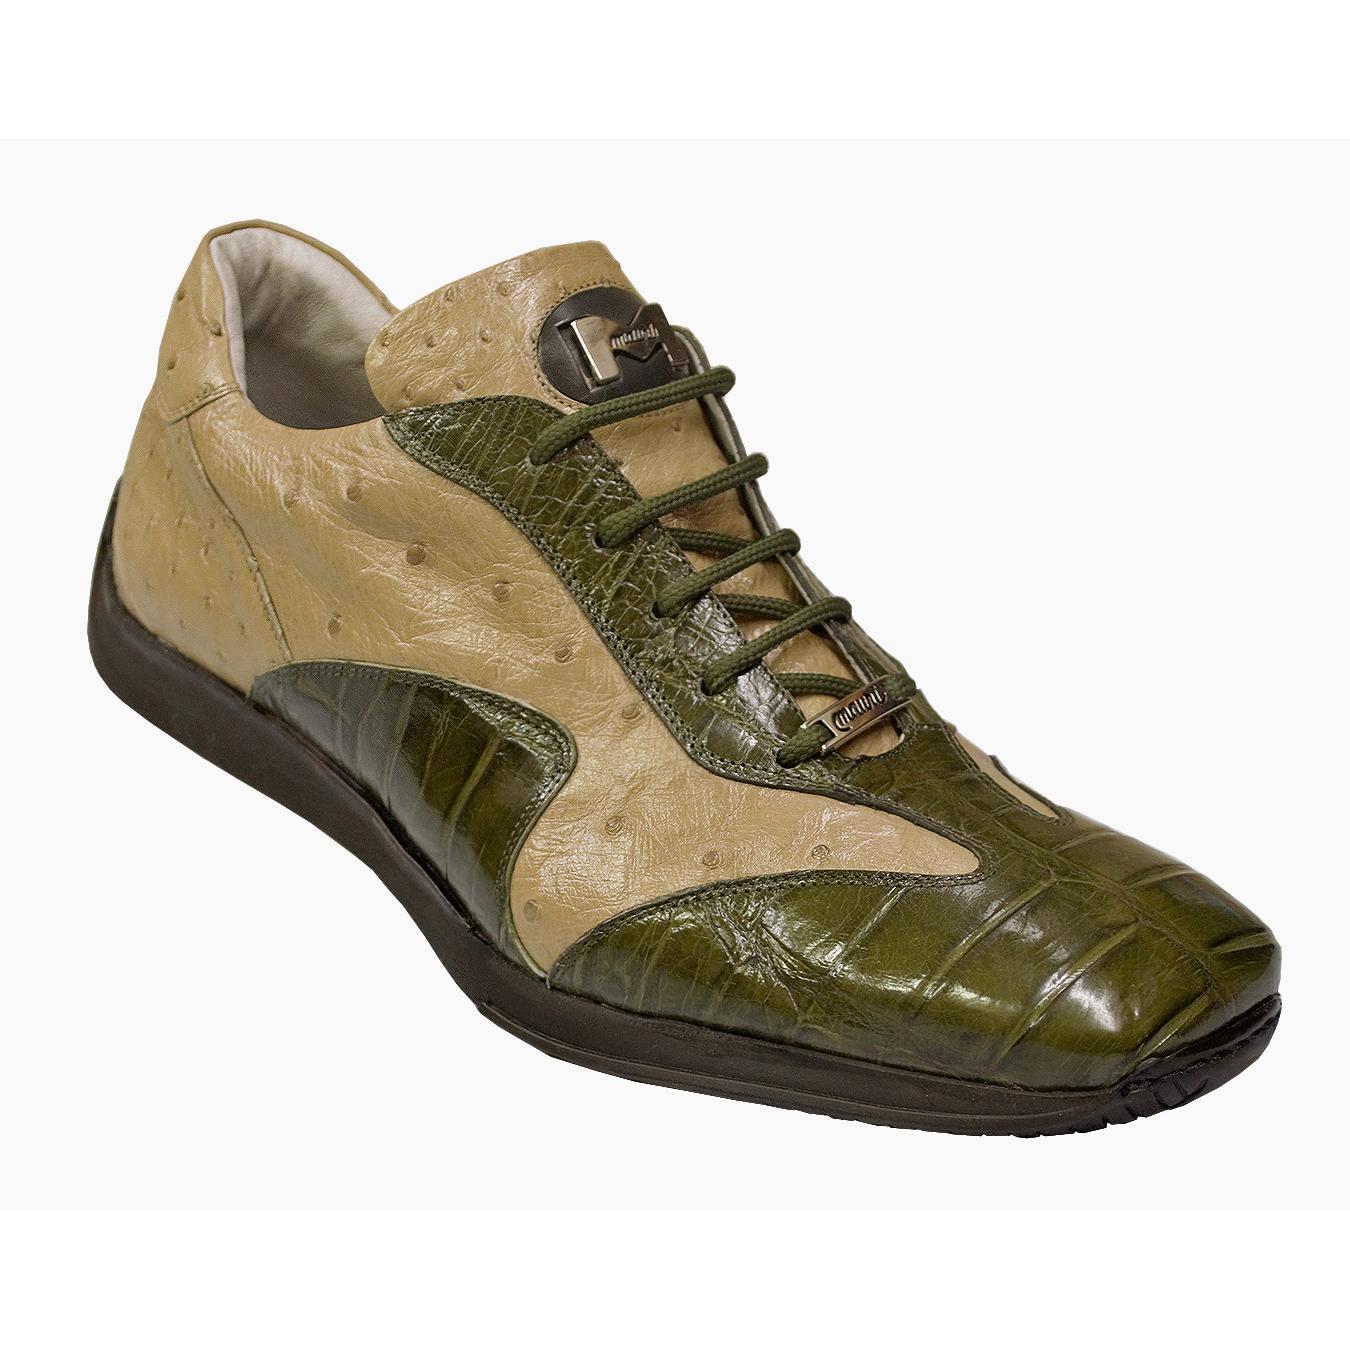 Mauri Green and Taupe Alligator and Ostrich Sneakers 8983